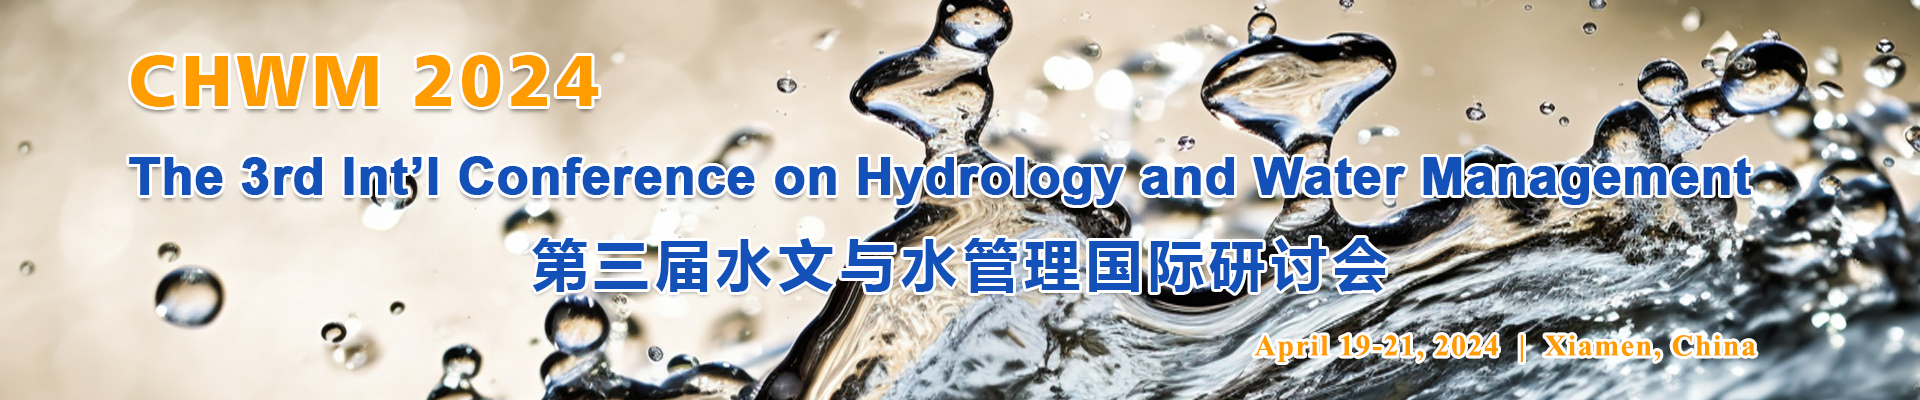 The 3rd Int’l Conference on Hydrology and Water Management (CHWM 2024), Xiamen, Fujian, China